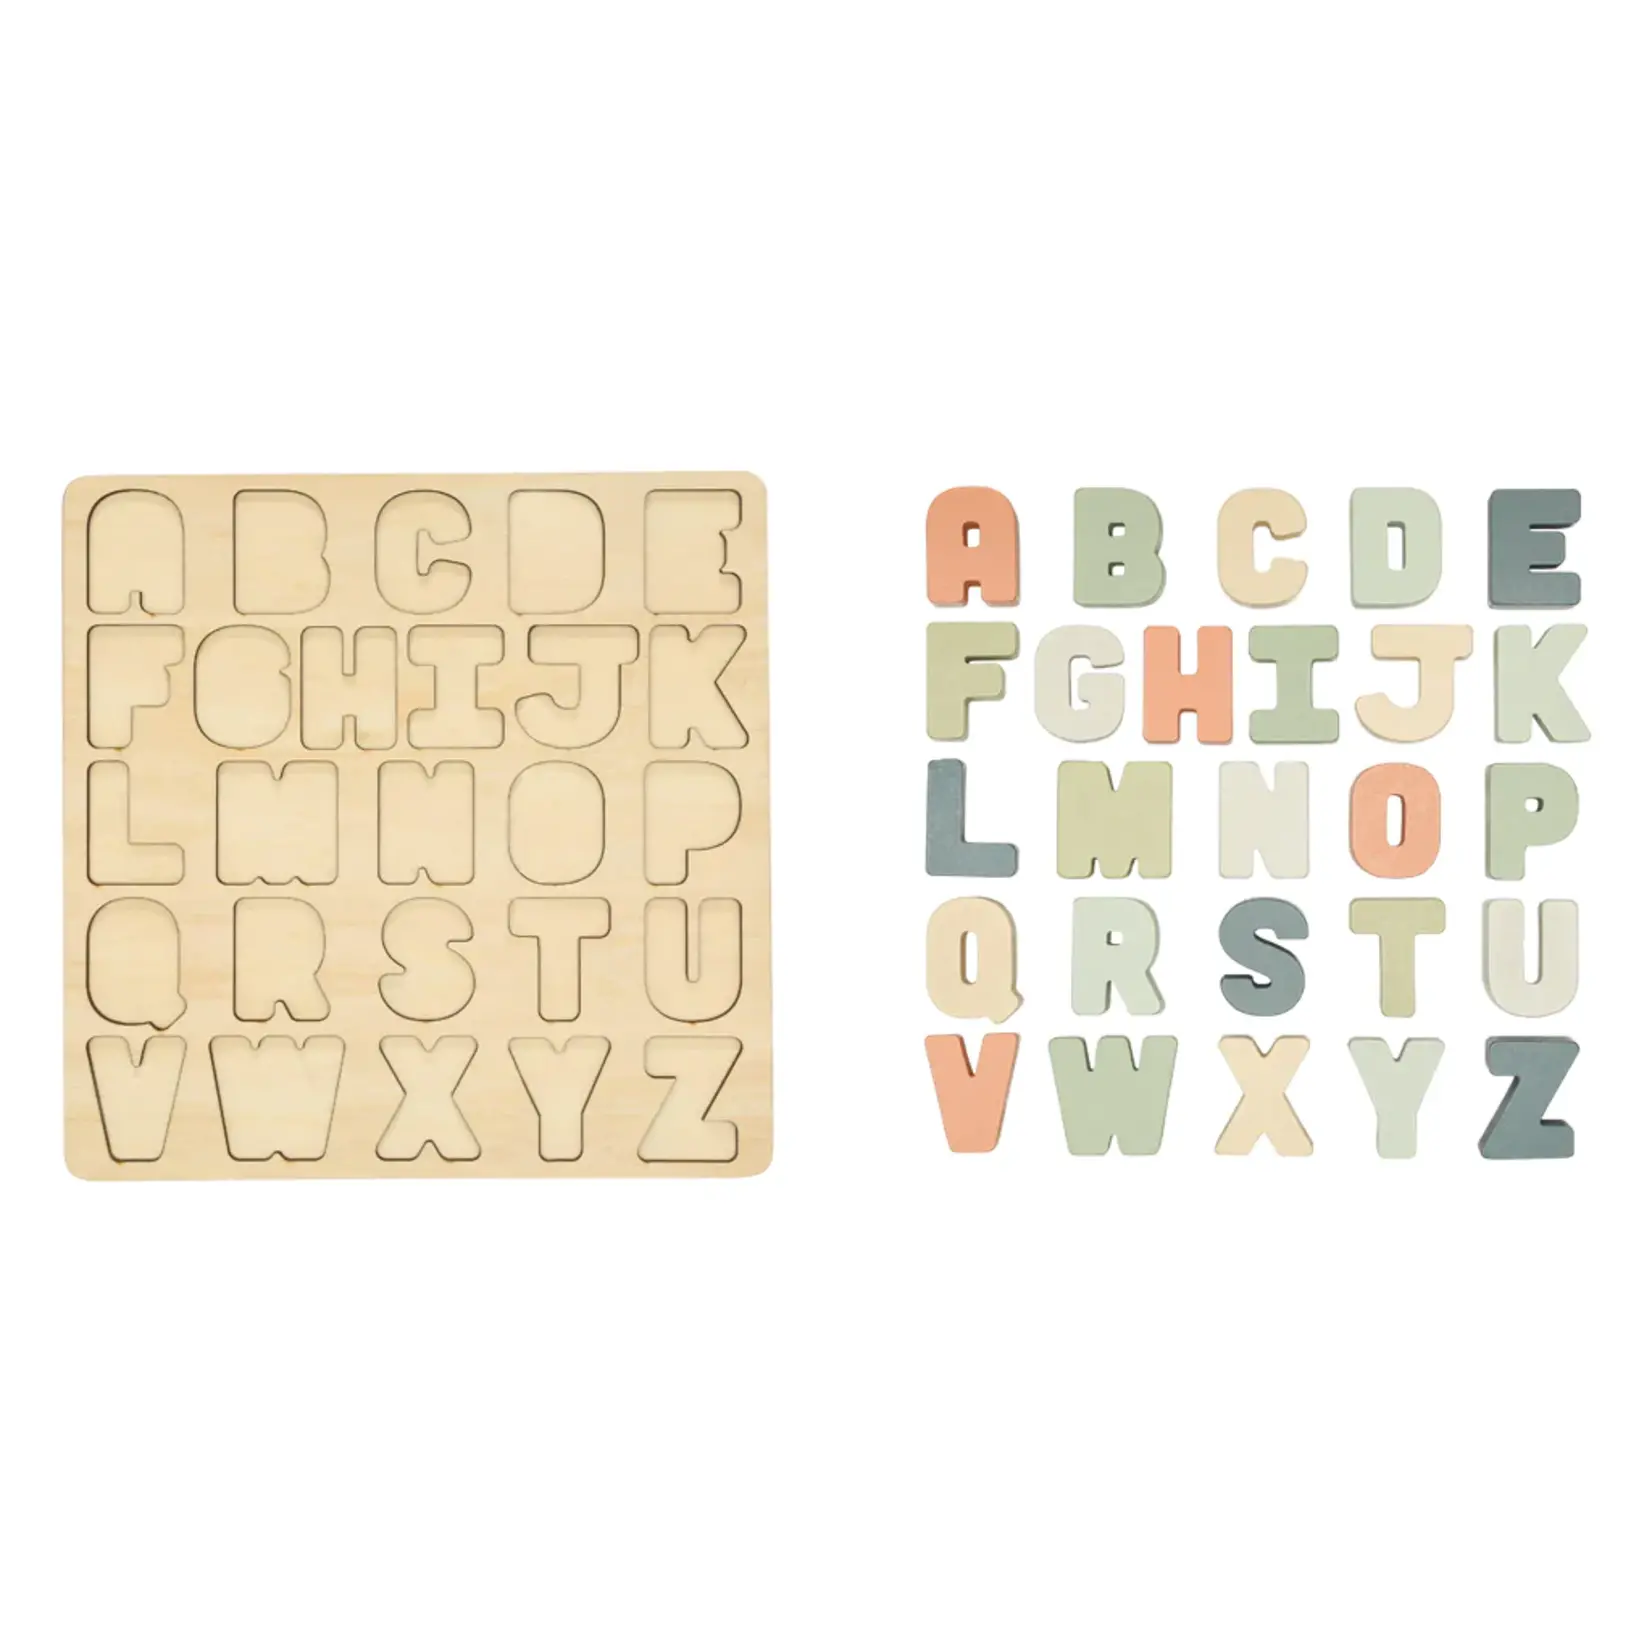 Pearhead PEARHEAD WOODEN ALPHABET PUZZLE